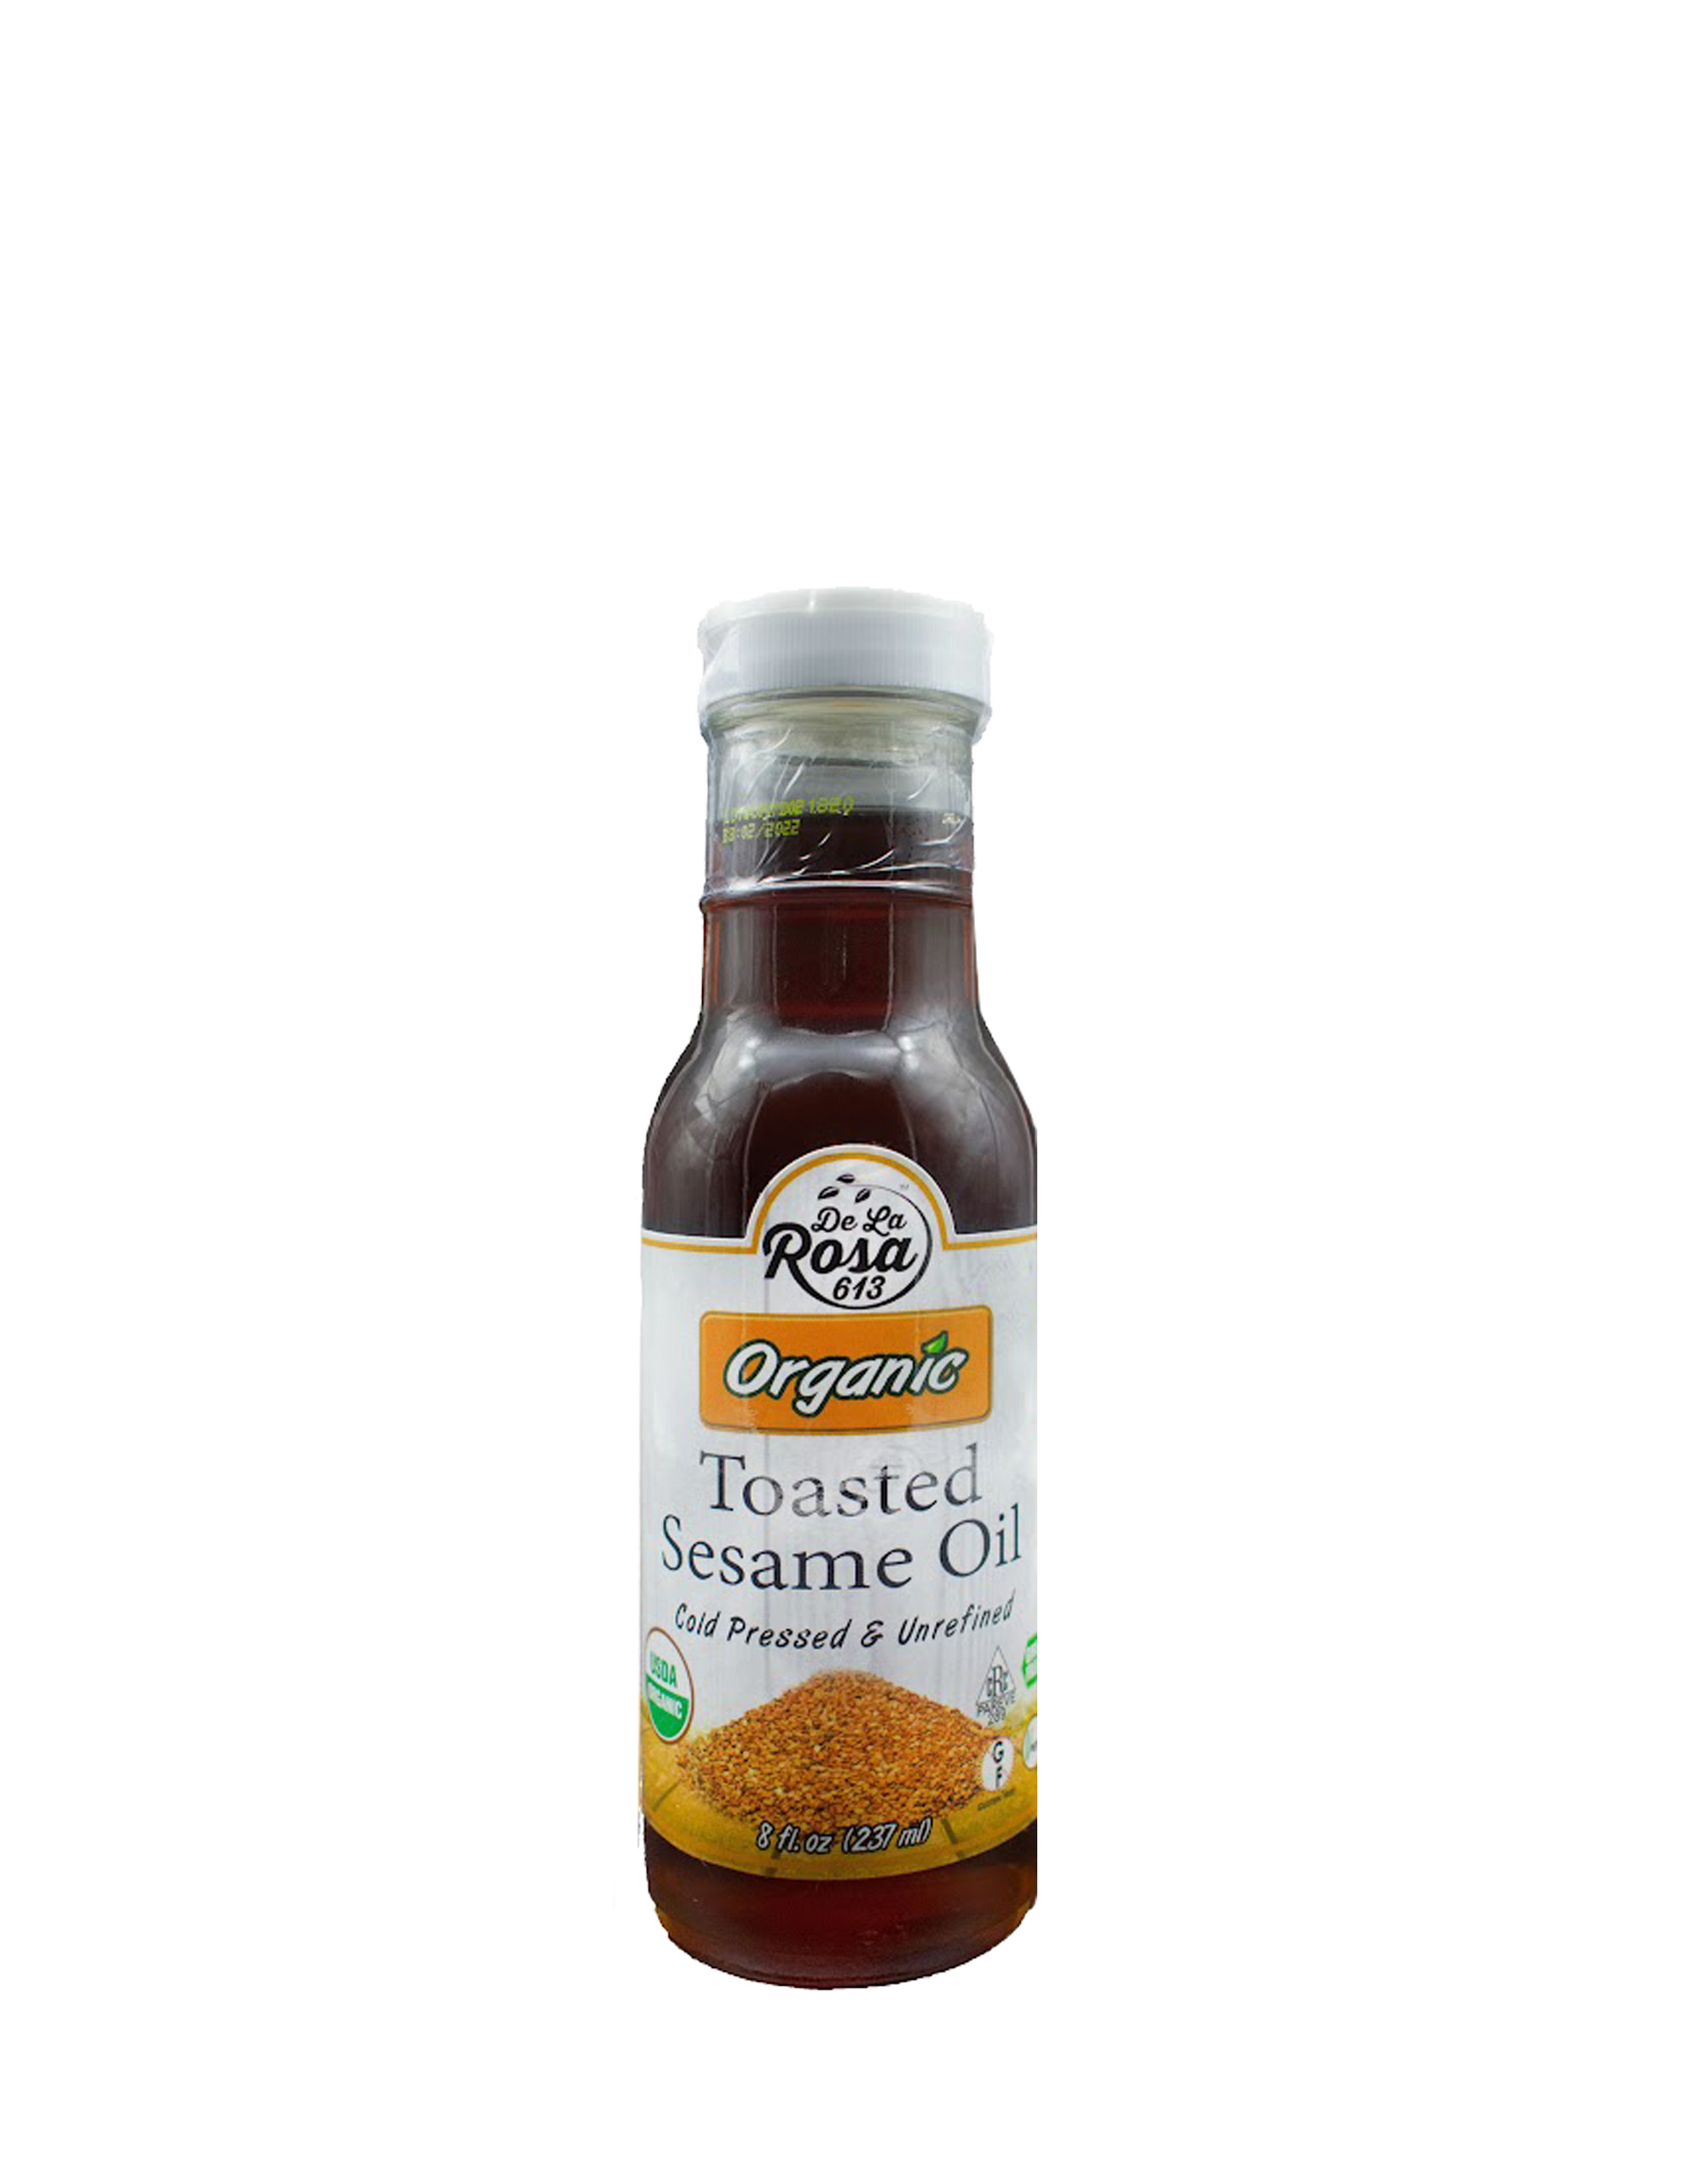 ORG_TOASTED SESAME OIL_ copy